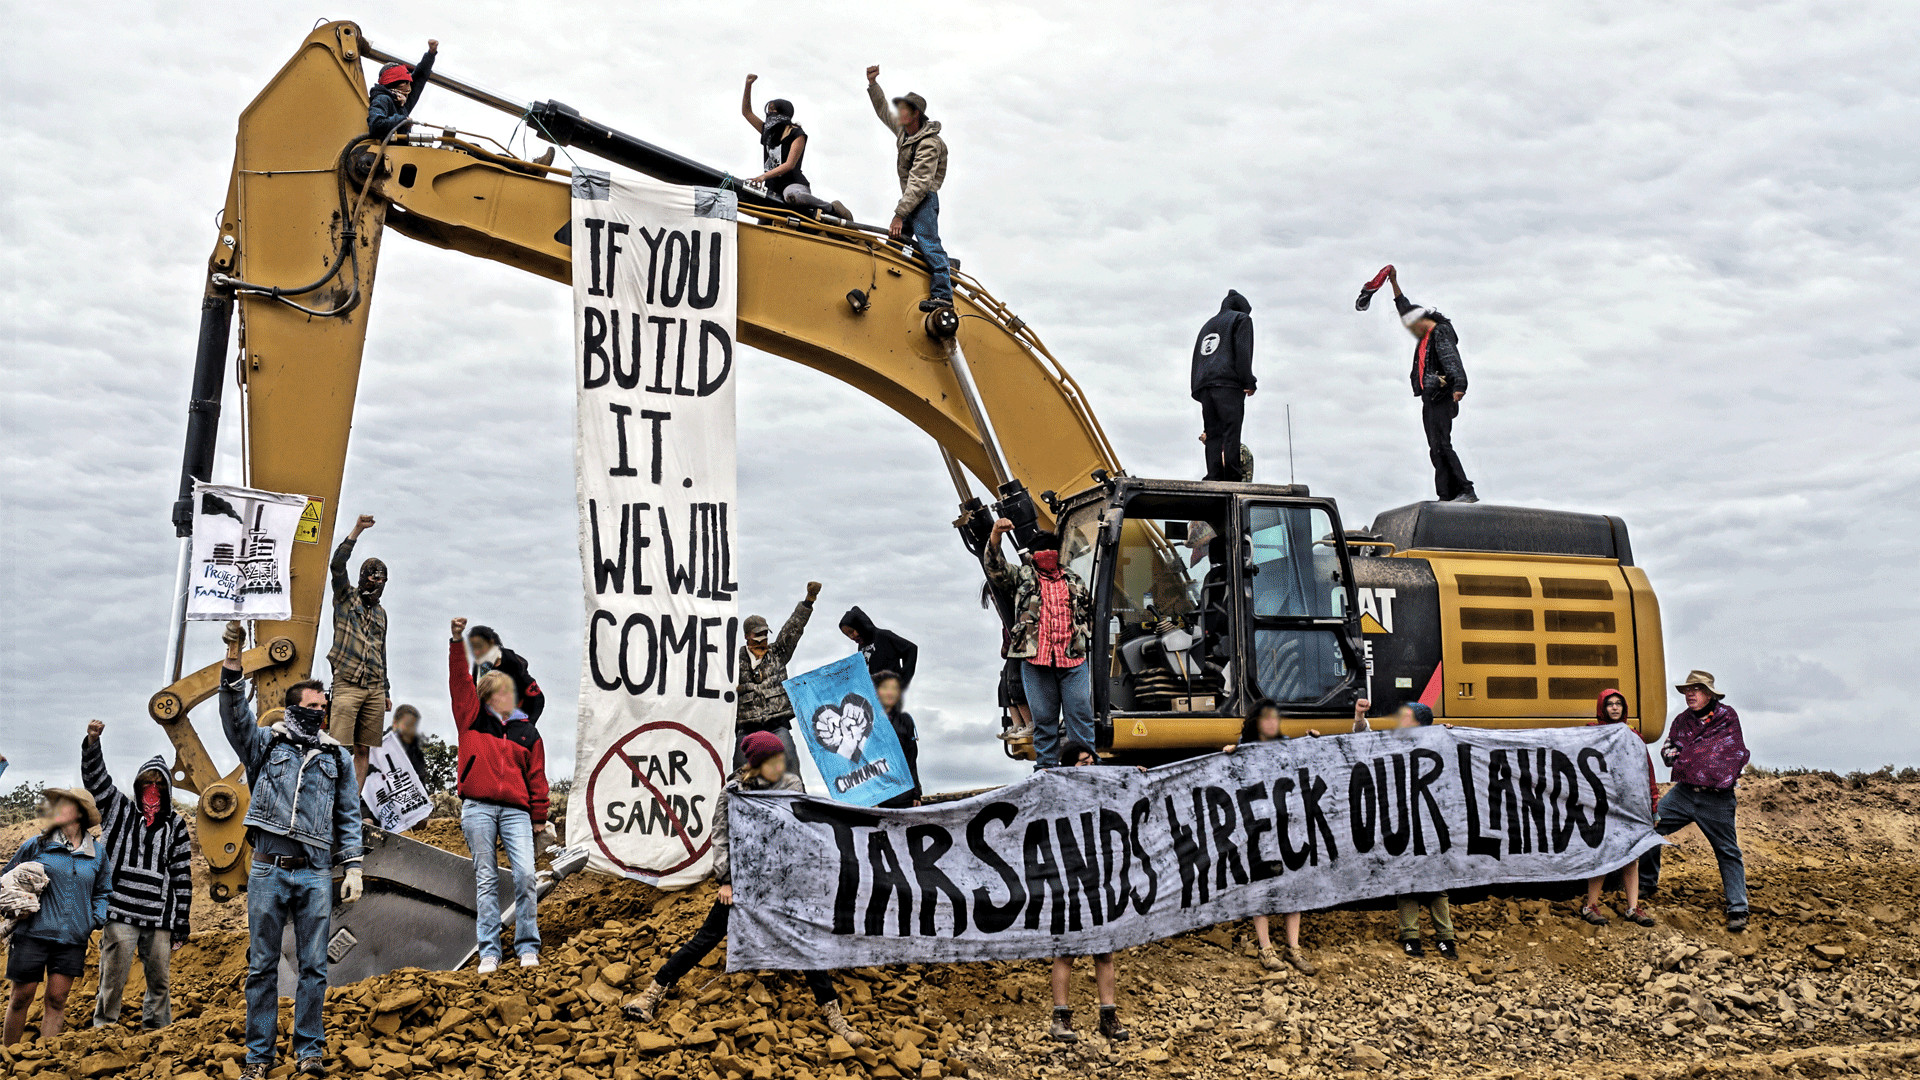 Photo of protesters surrounding and on top of a large backhoe, most of their fists raised above their heads. A large banner hangs from the arm of the backhoe reading 'If you build it we will come' and 'Tar sands' with a red cross through it. A second banner is held by protesters on the ground, reading 'tar sands wreck our lands'.